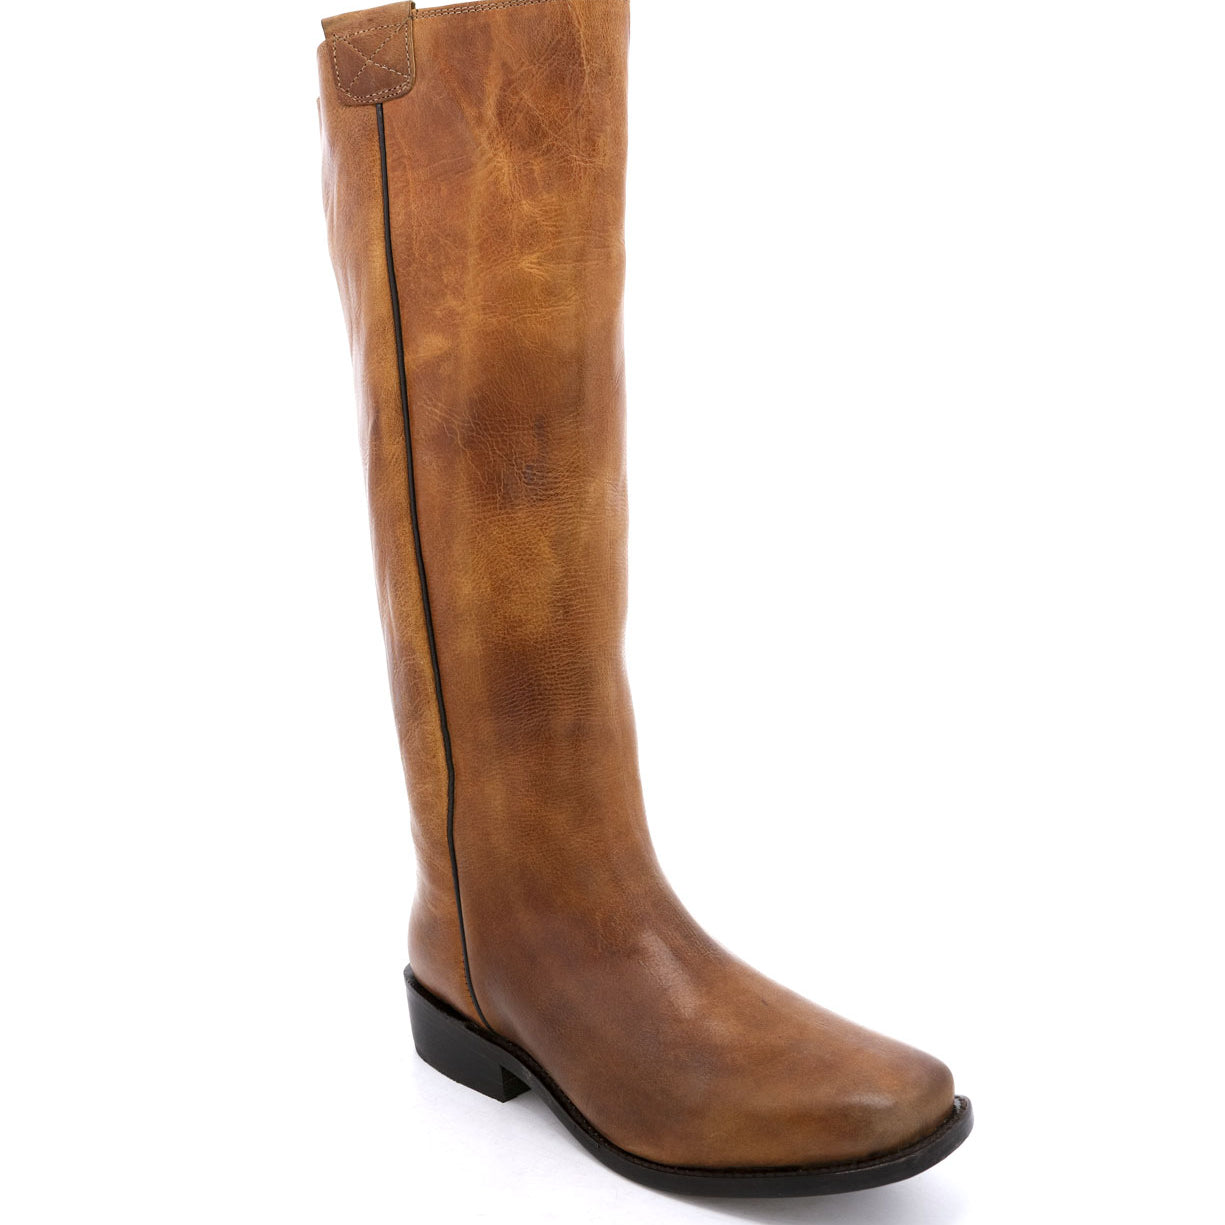 A women's Pale Rider riding boot by Oak Tree Farms on a white background.